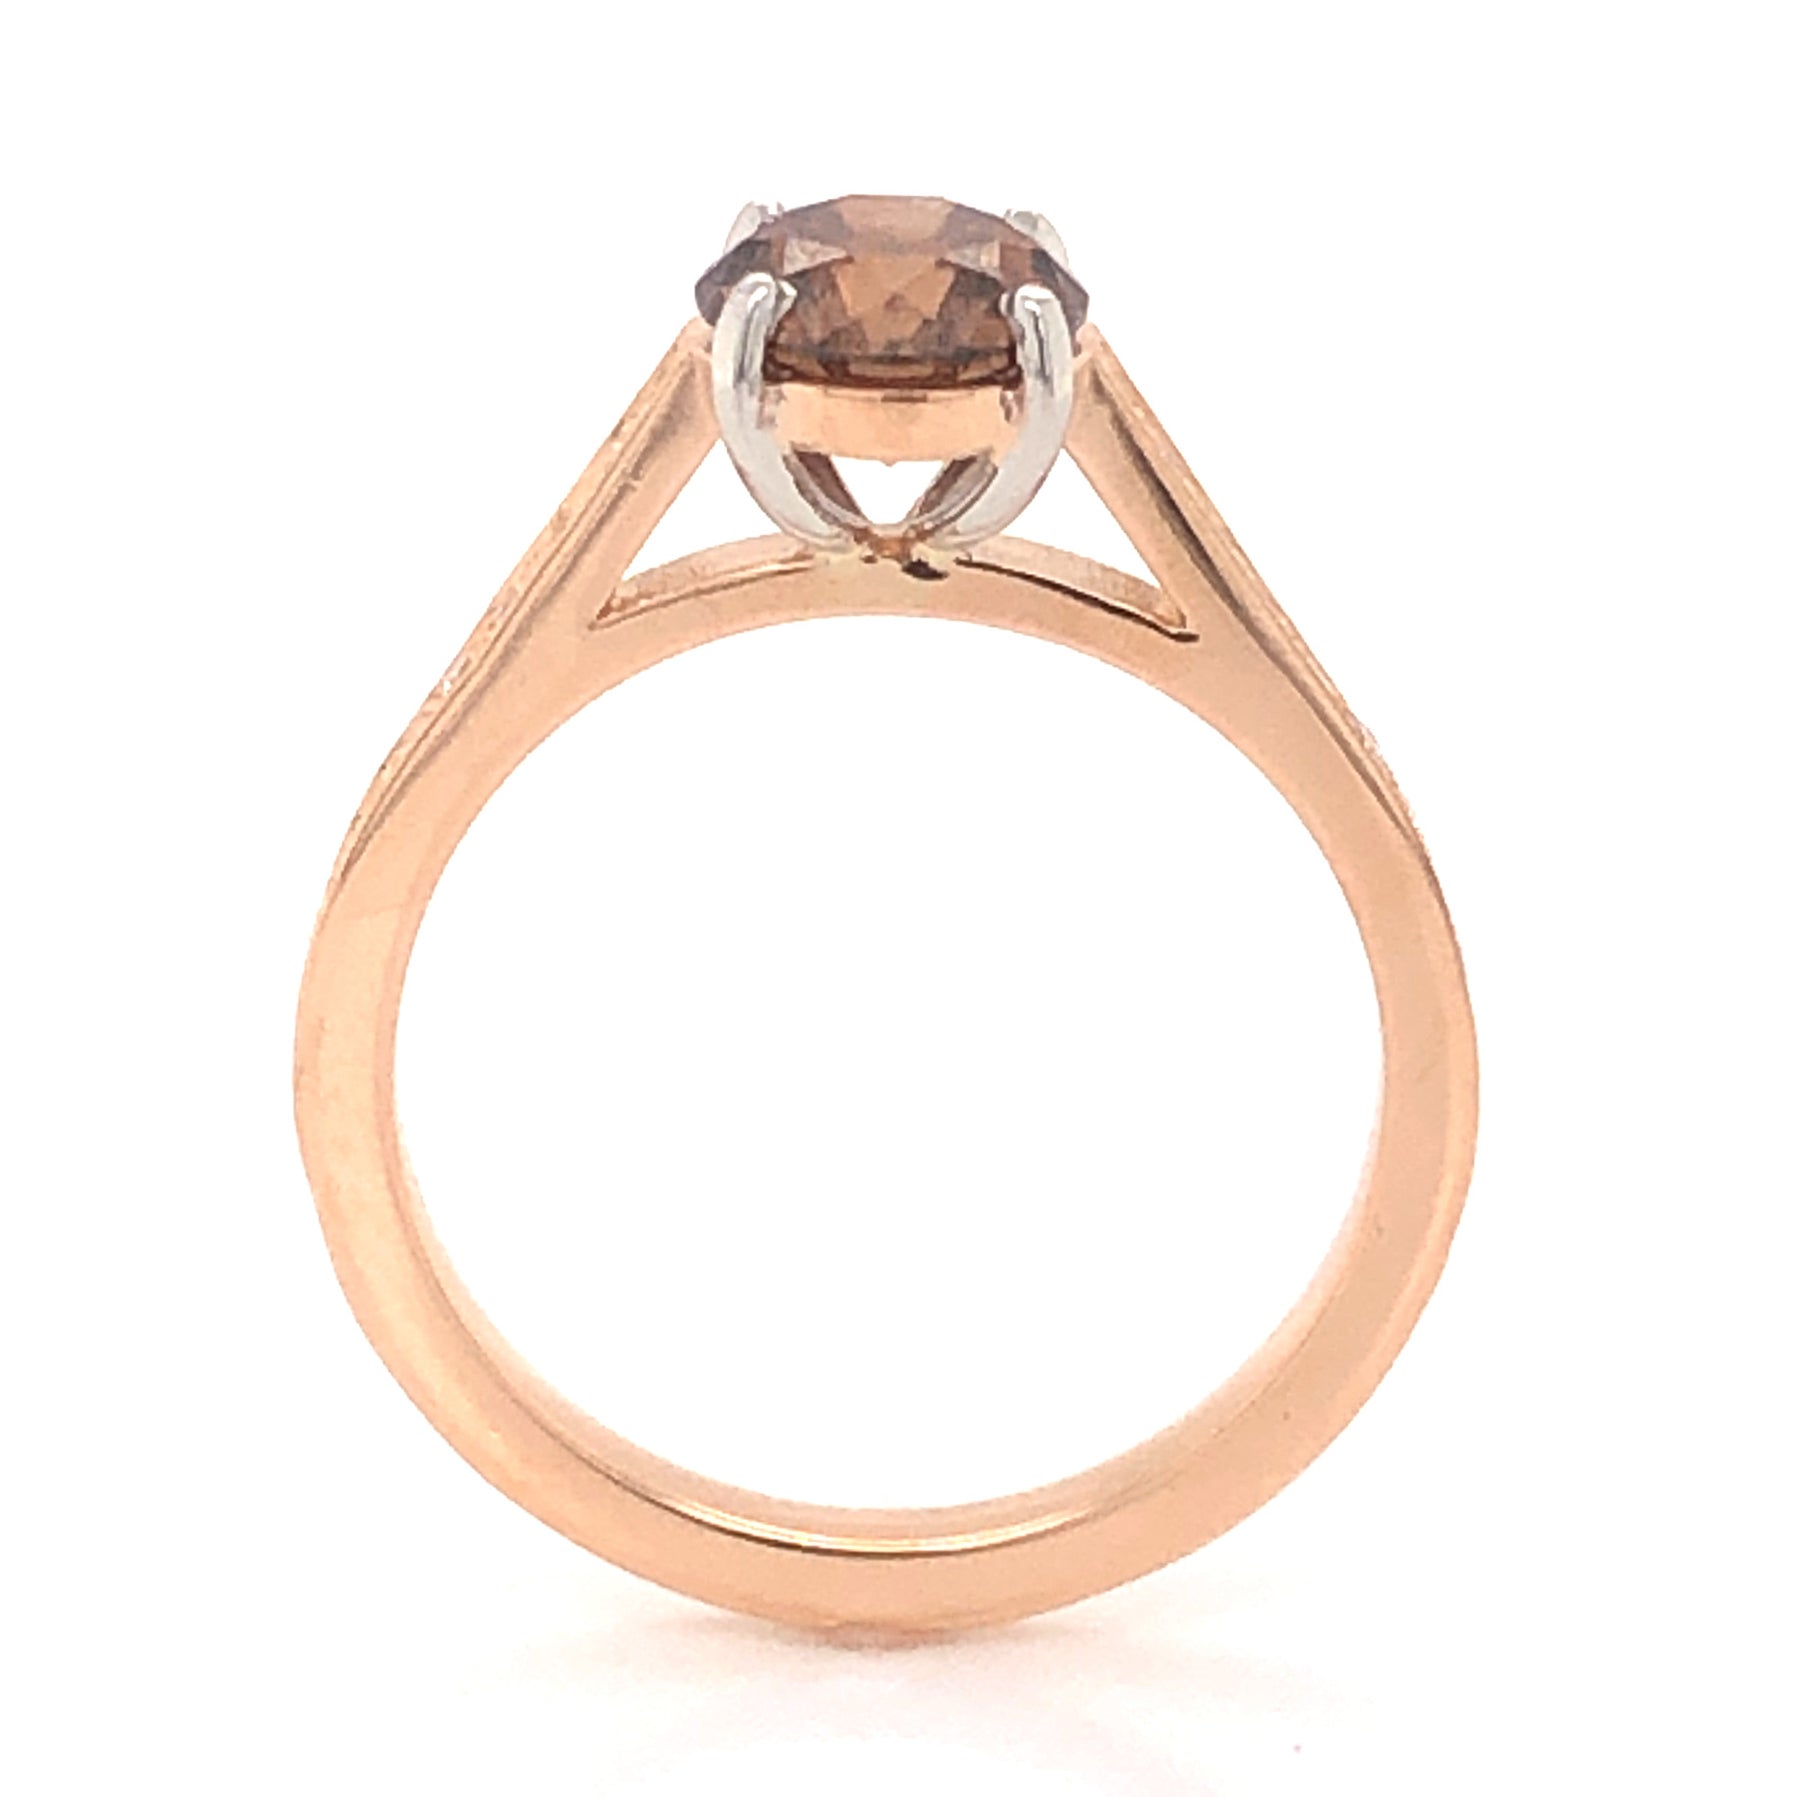 1.15 Chocolate Diamond Engagement Ring in 18K Rose GoldComposition: PlatinumRing Size: 6.25Total Diamond Weight: 1.39 ctTotal Gram Weight: 3.5 gInscription: 750 PT 900